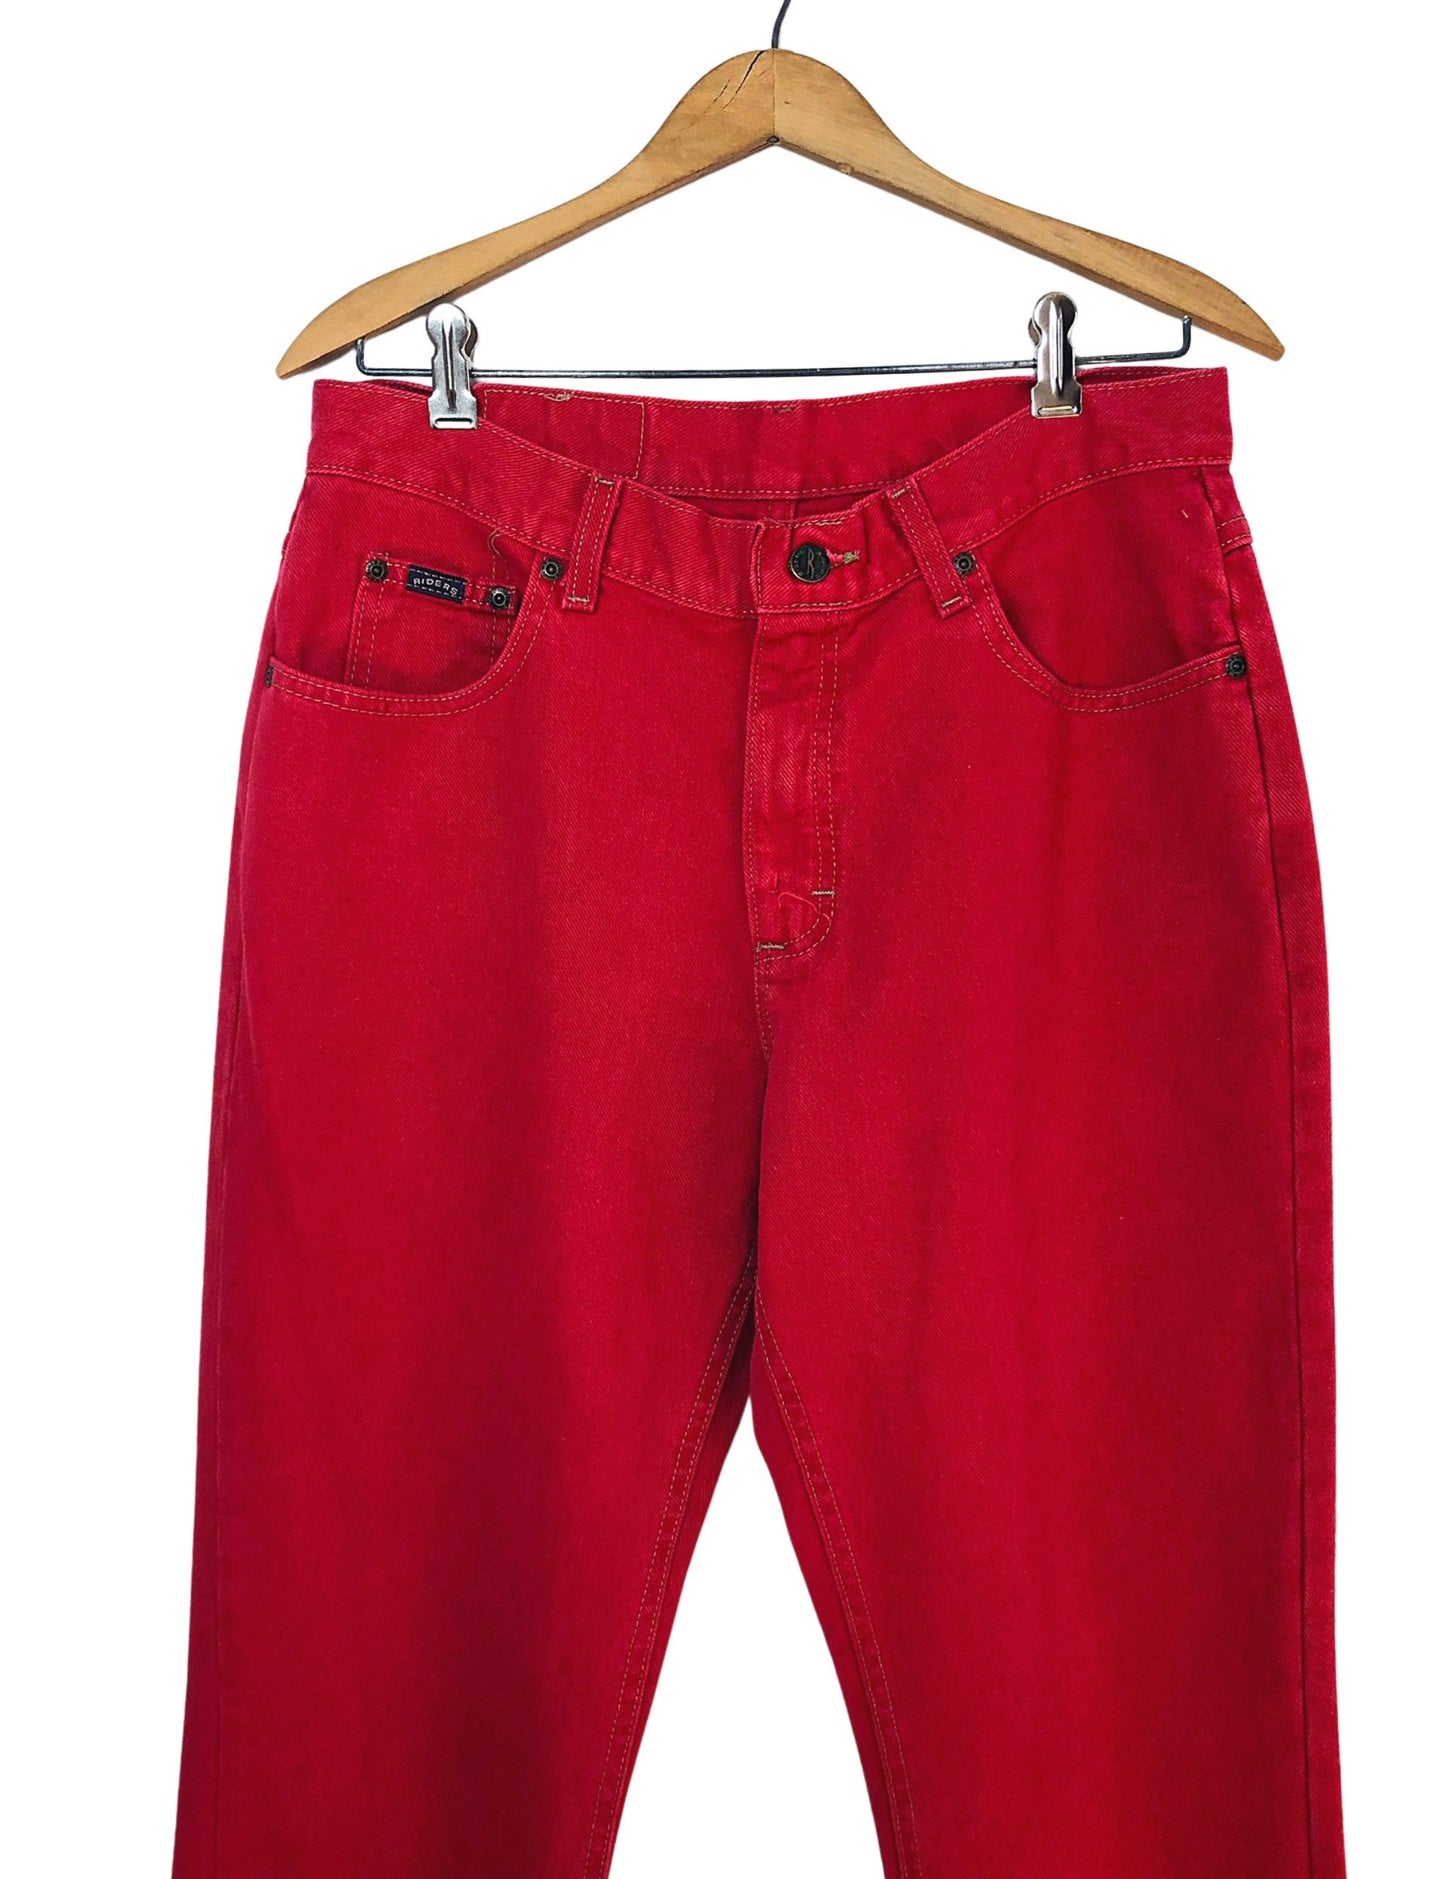 90’s Riders Cherry Red Denim Tapered Leg Jeans Size 10/12